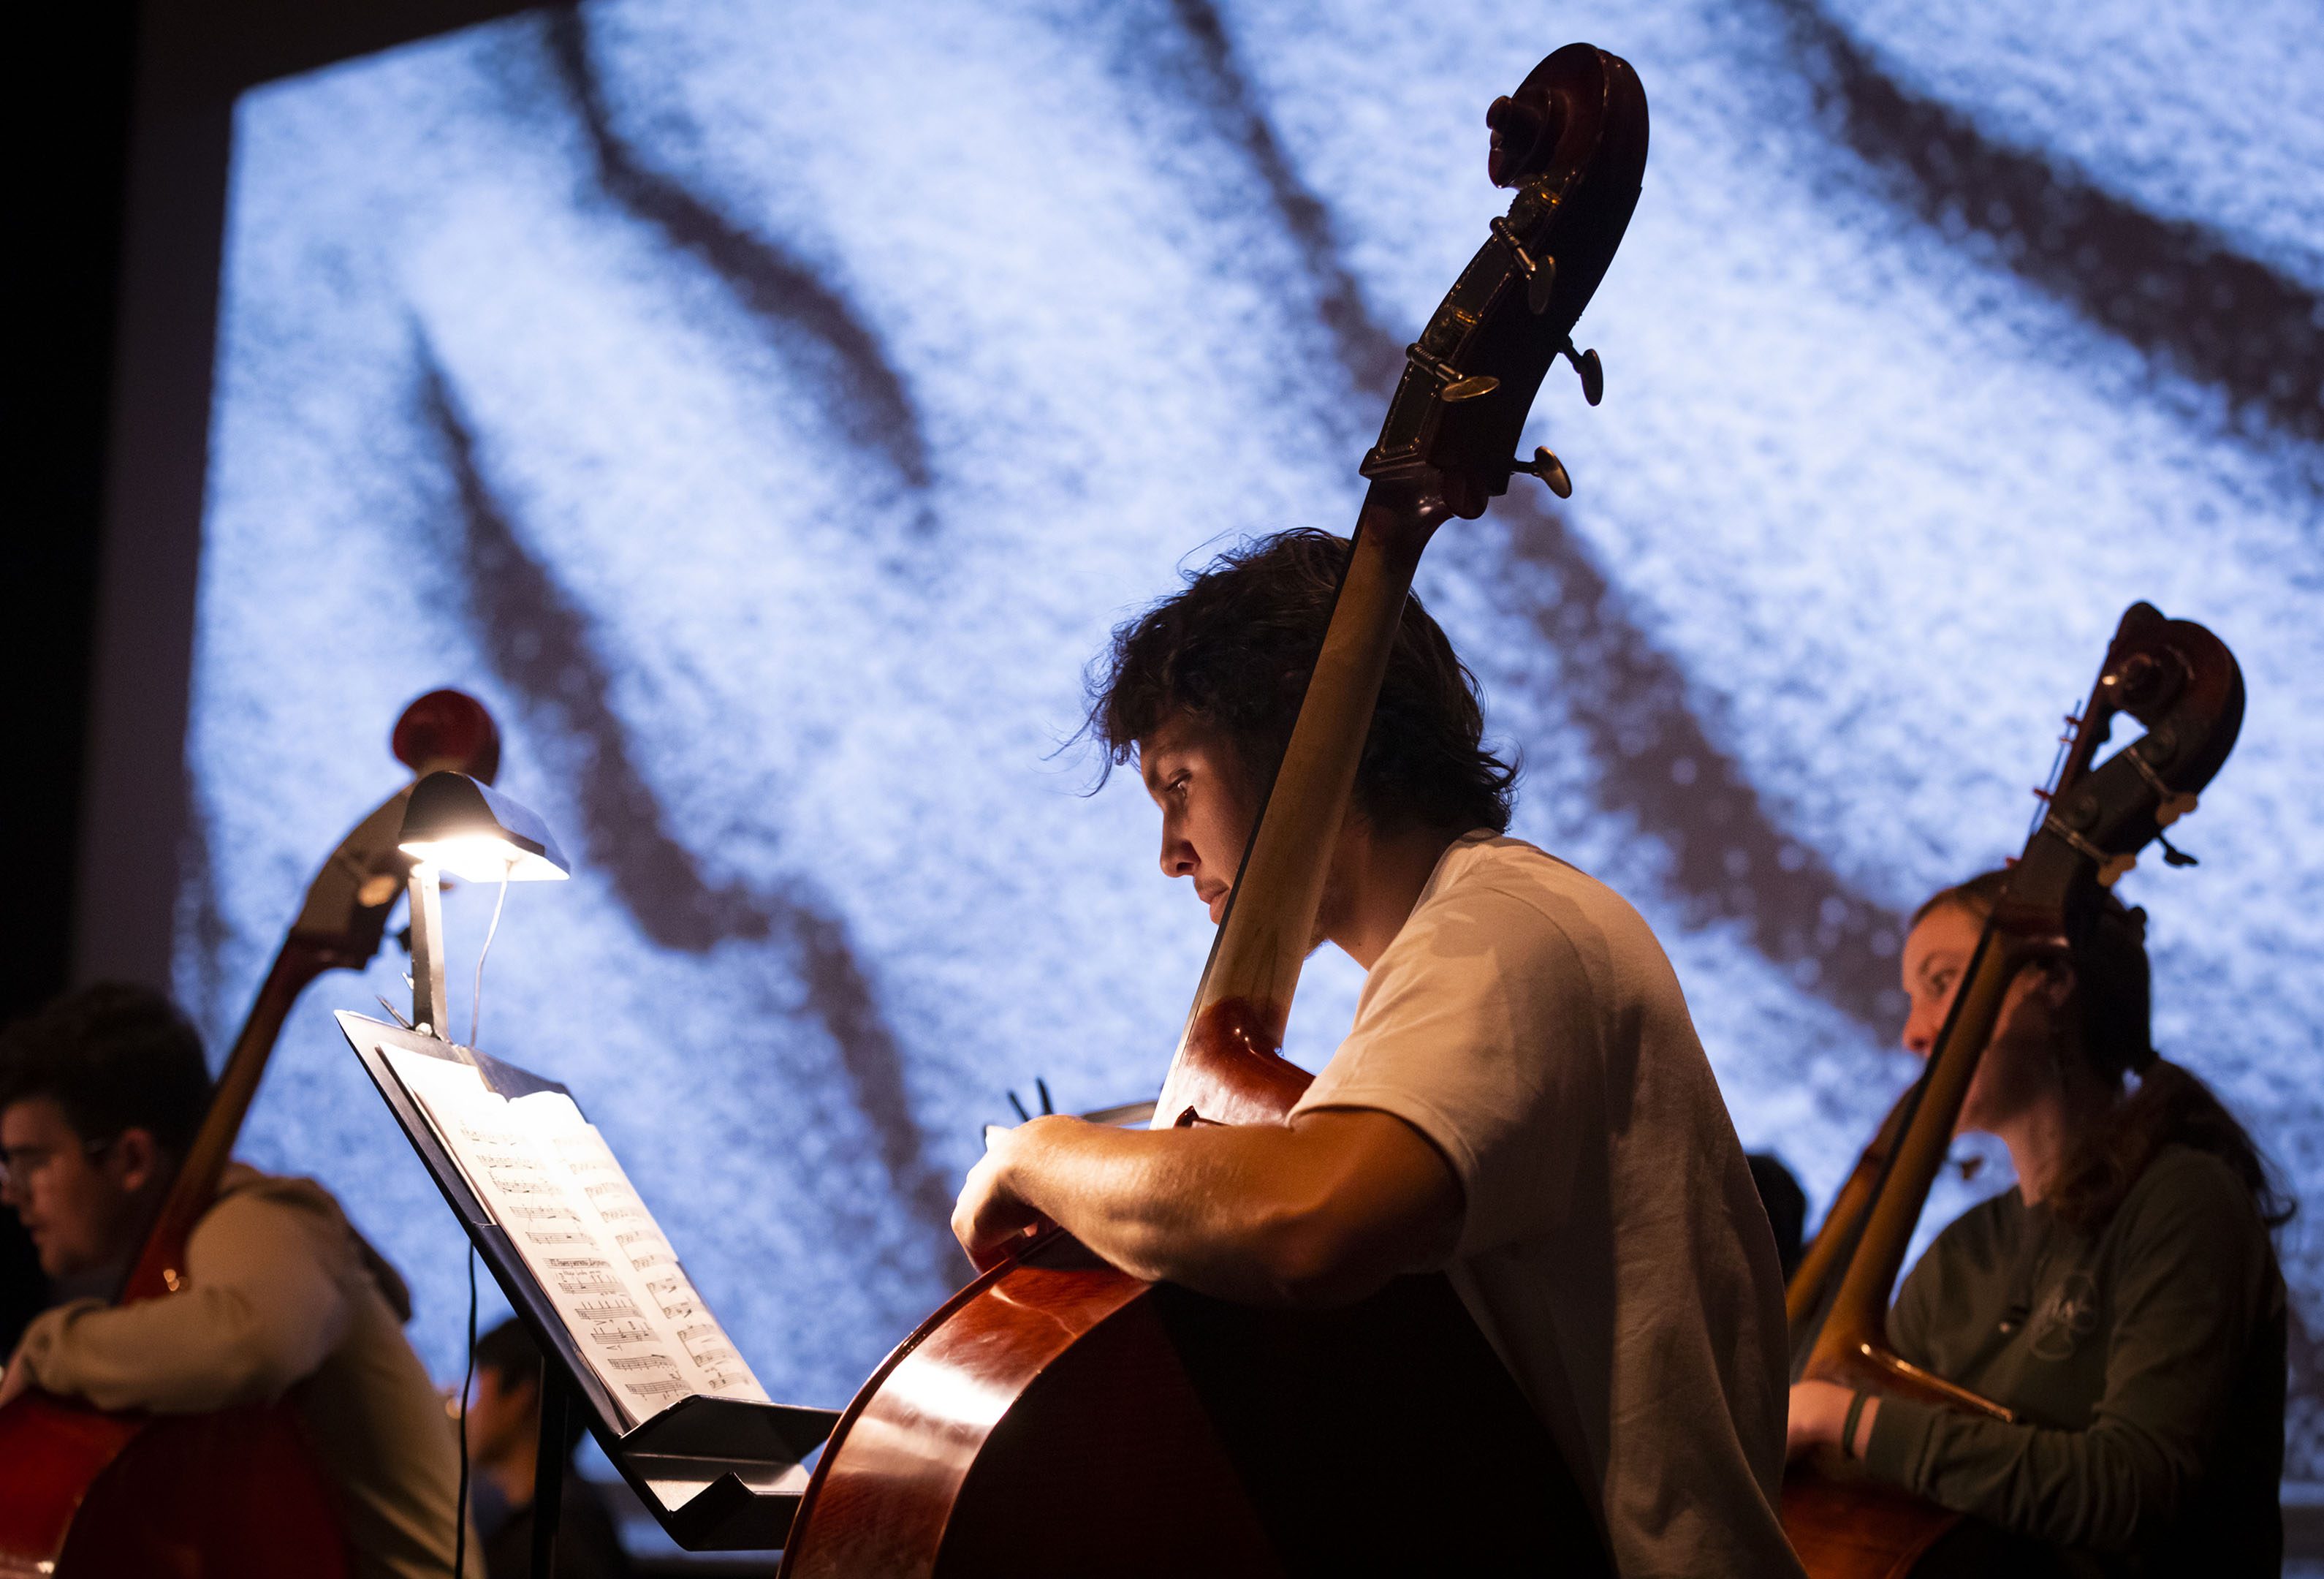 Three musicans play the cello in front of an illuminated screen and sheet music